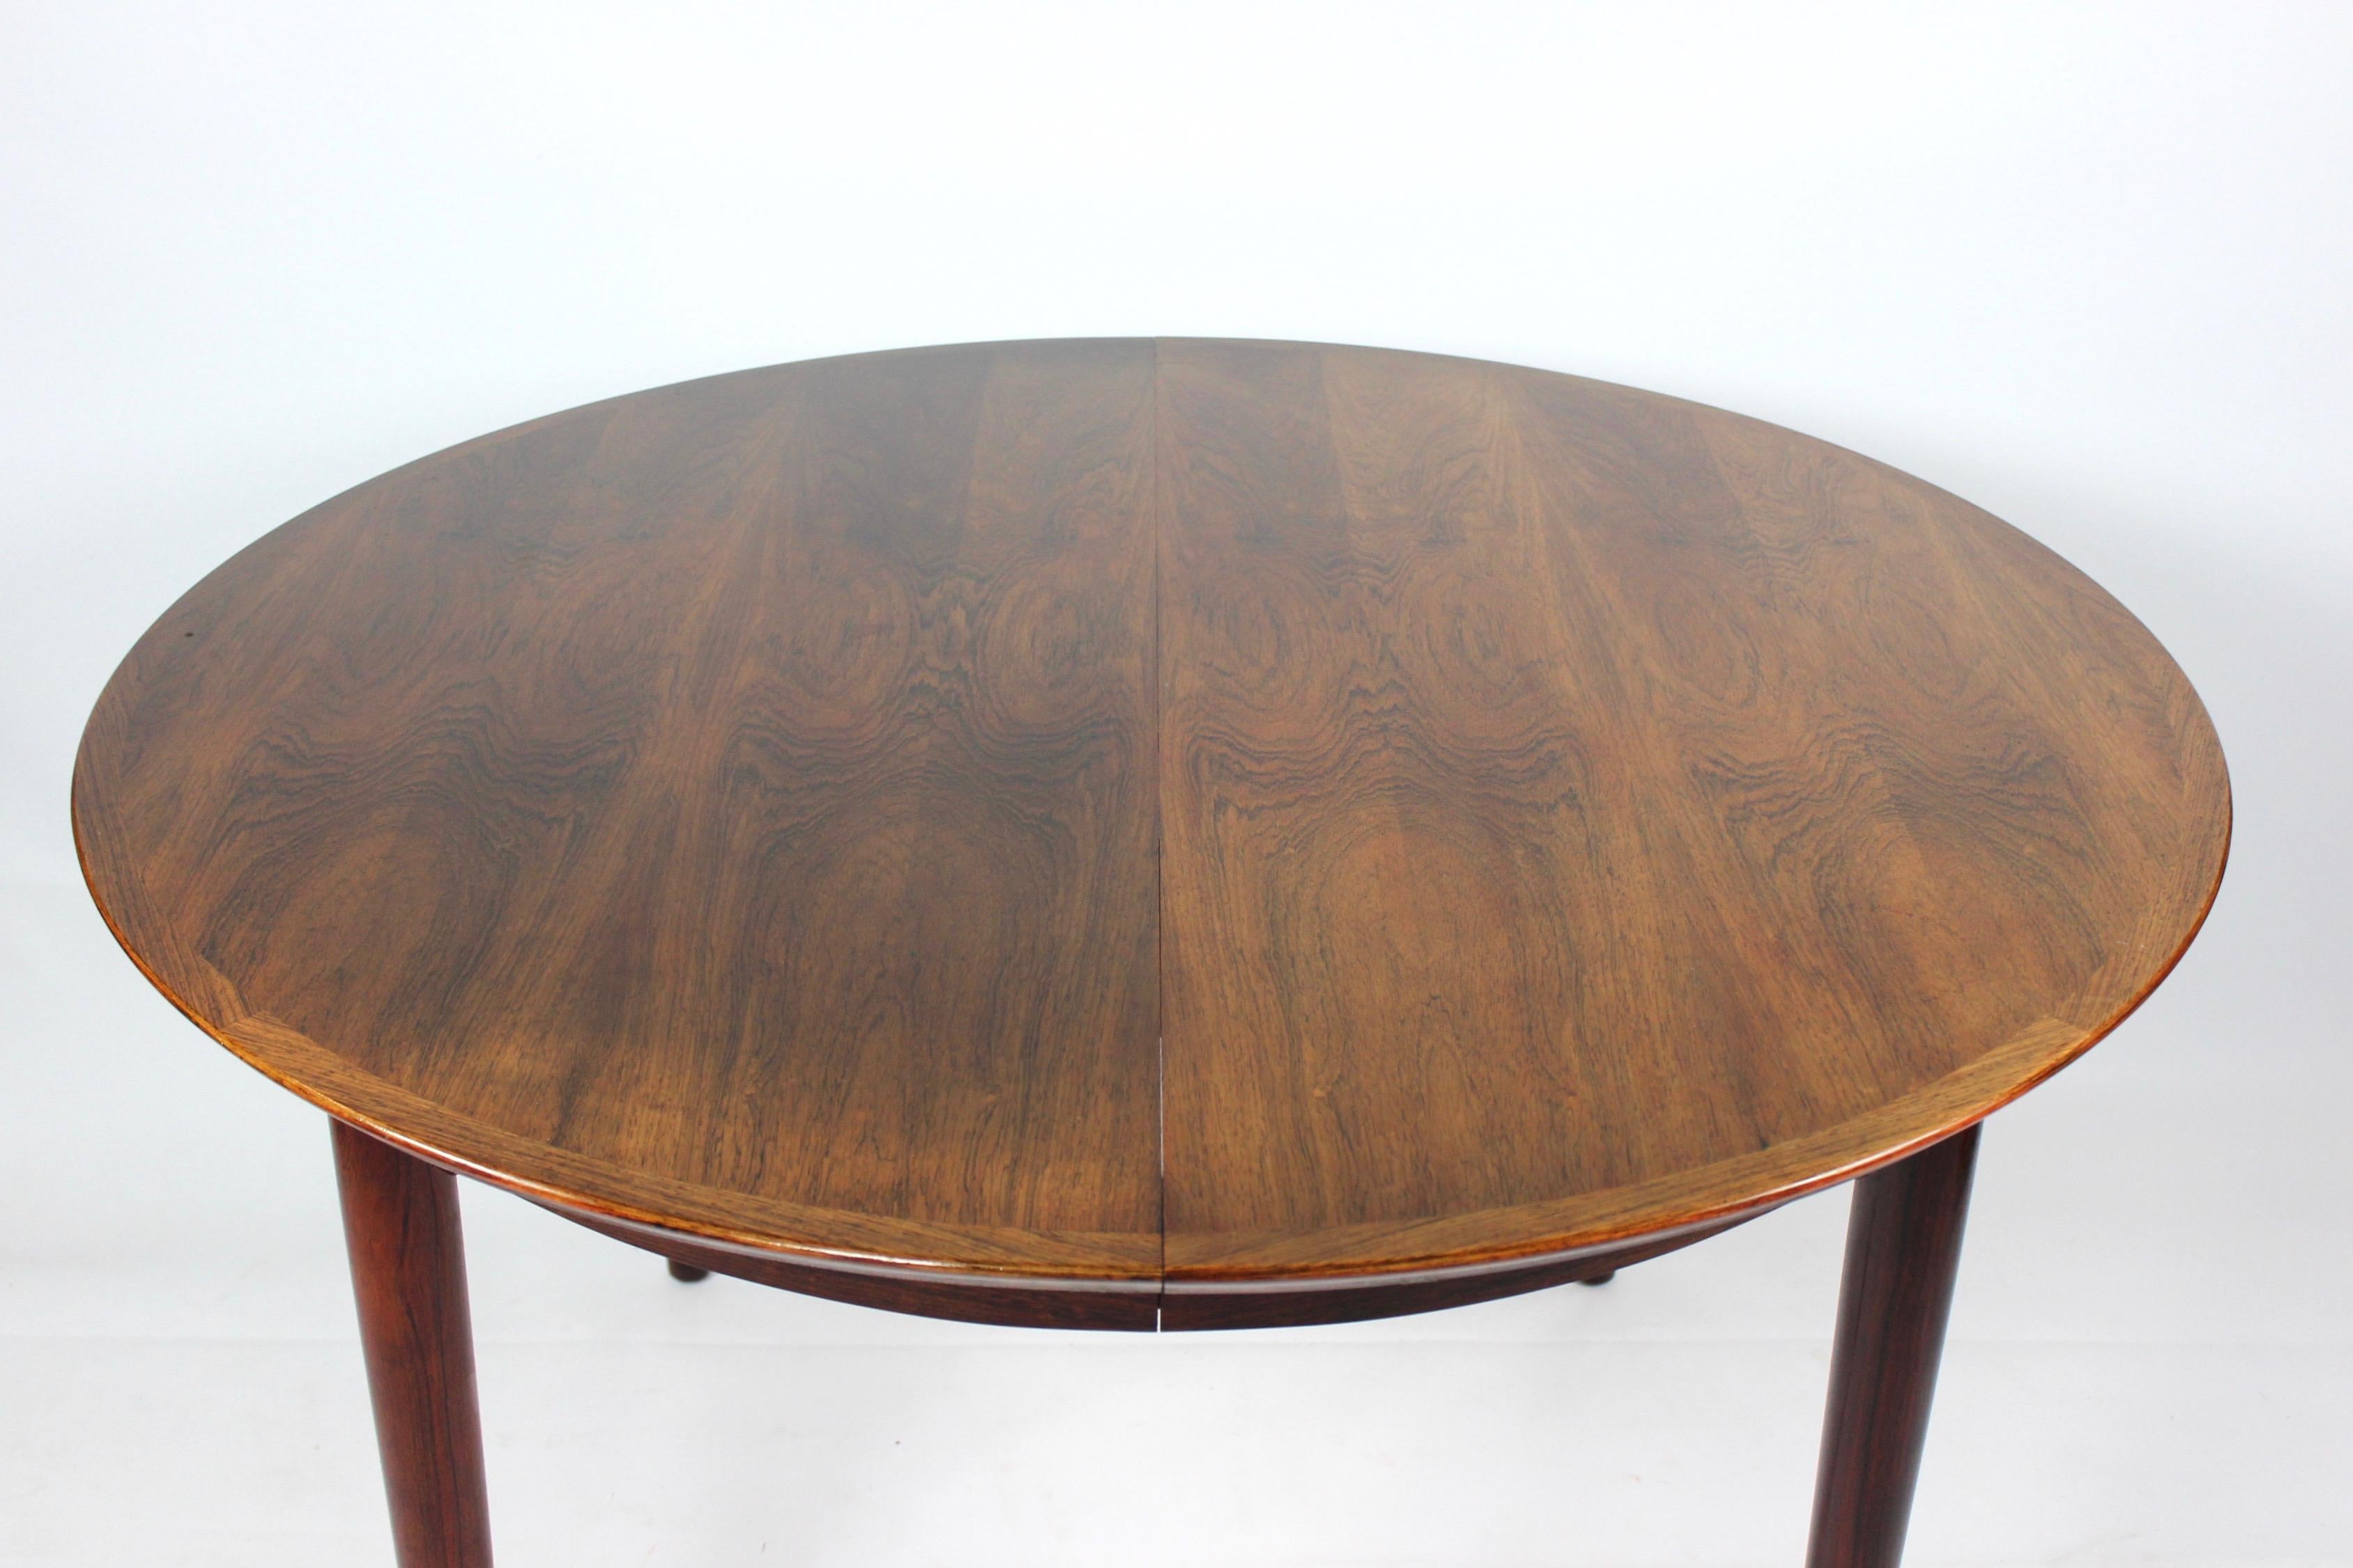 Scandinavian Modern Dining Table of Rosewood with Three Extension Plates by Arne Vodder, 1960s For Sale